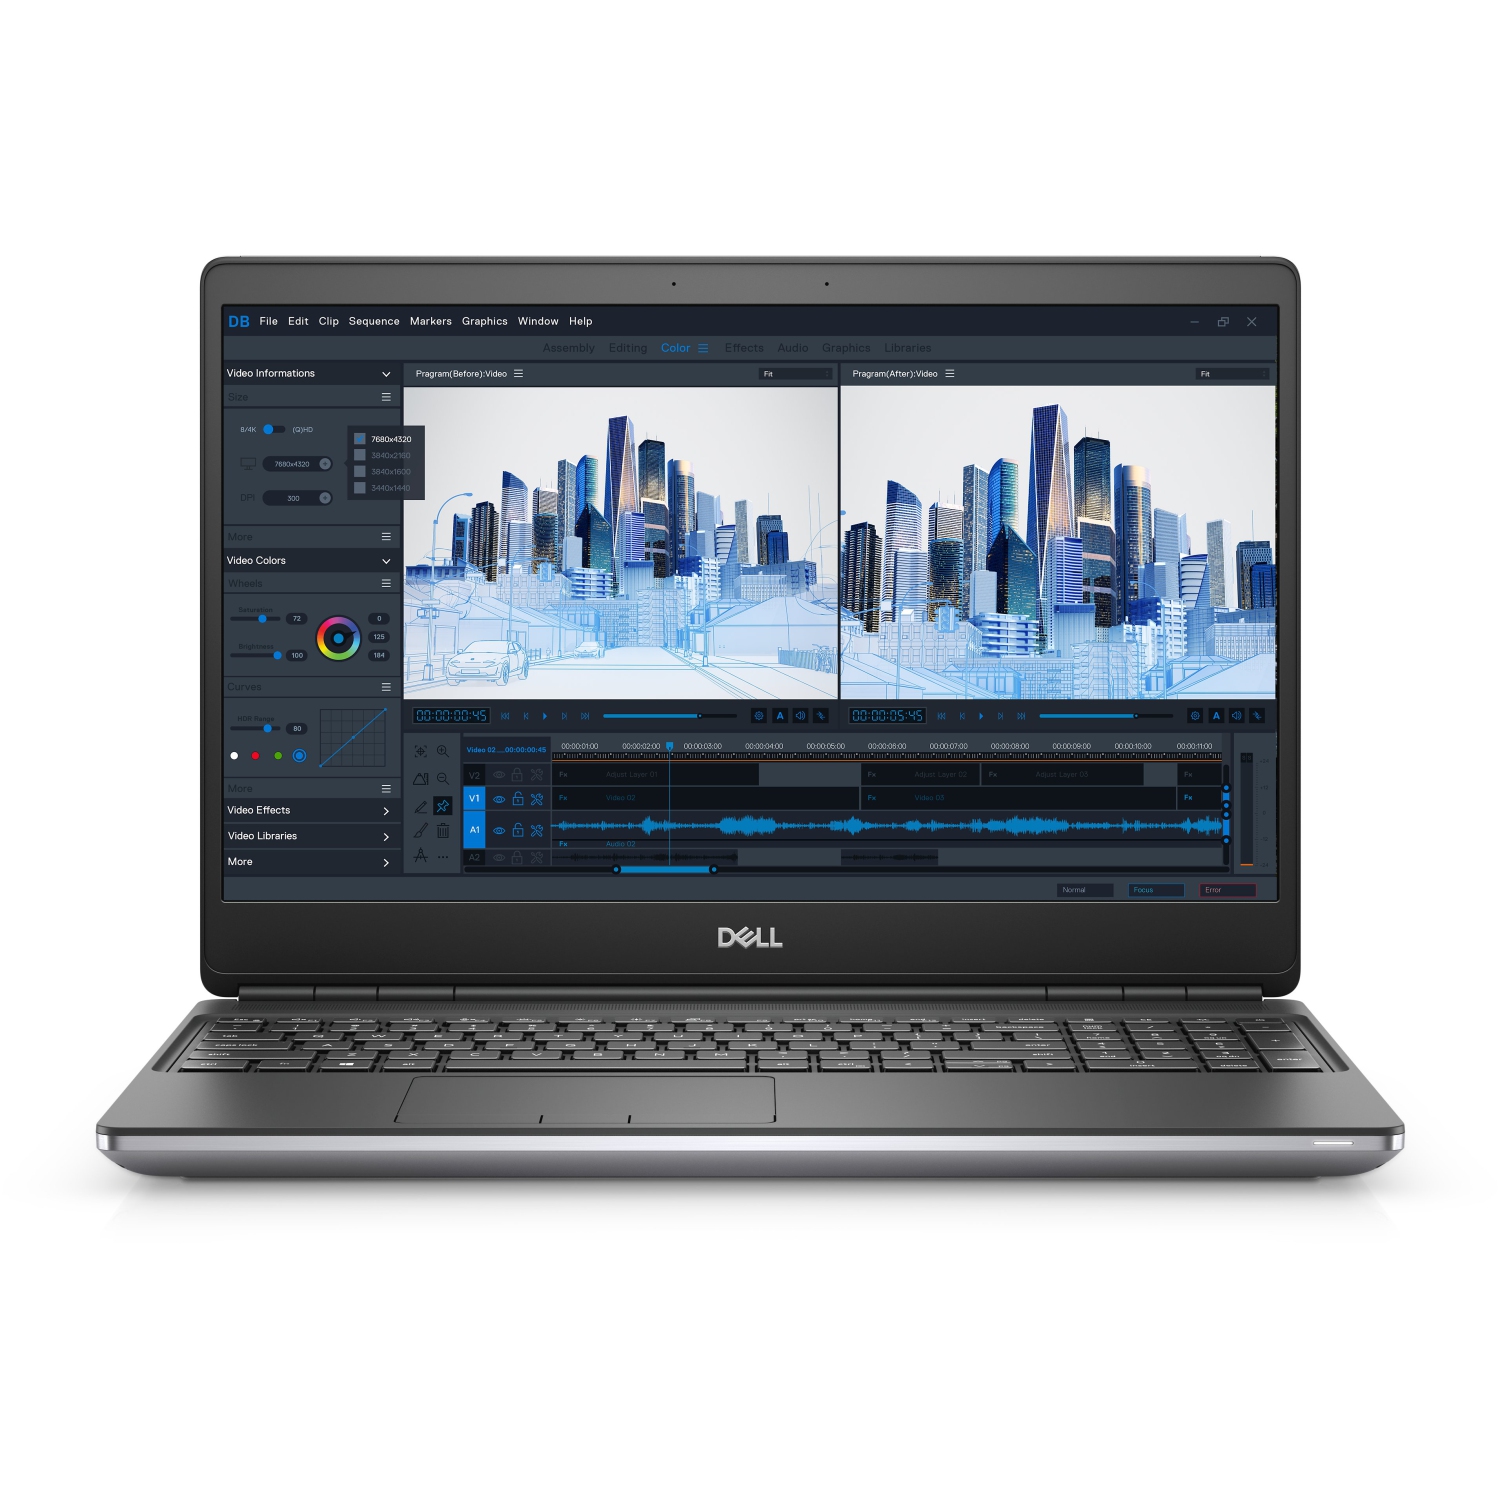 Refurbished (Excellent) - Dell Precision 7000 7560 Workstation Laptop (2021), 15.6" FHD, Core i7, 512GB SSD, 8GB RAM, RTX A5000, 4.8 GHz, 11th Gen CPU Certified